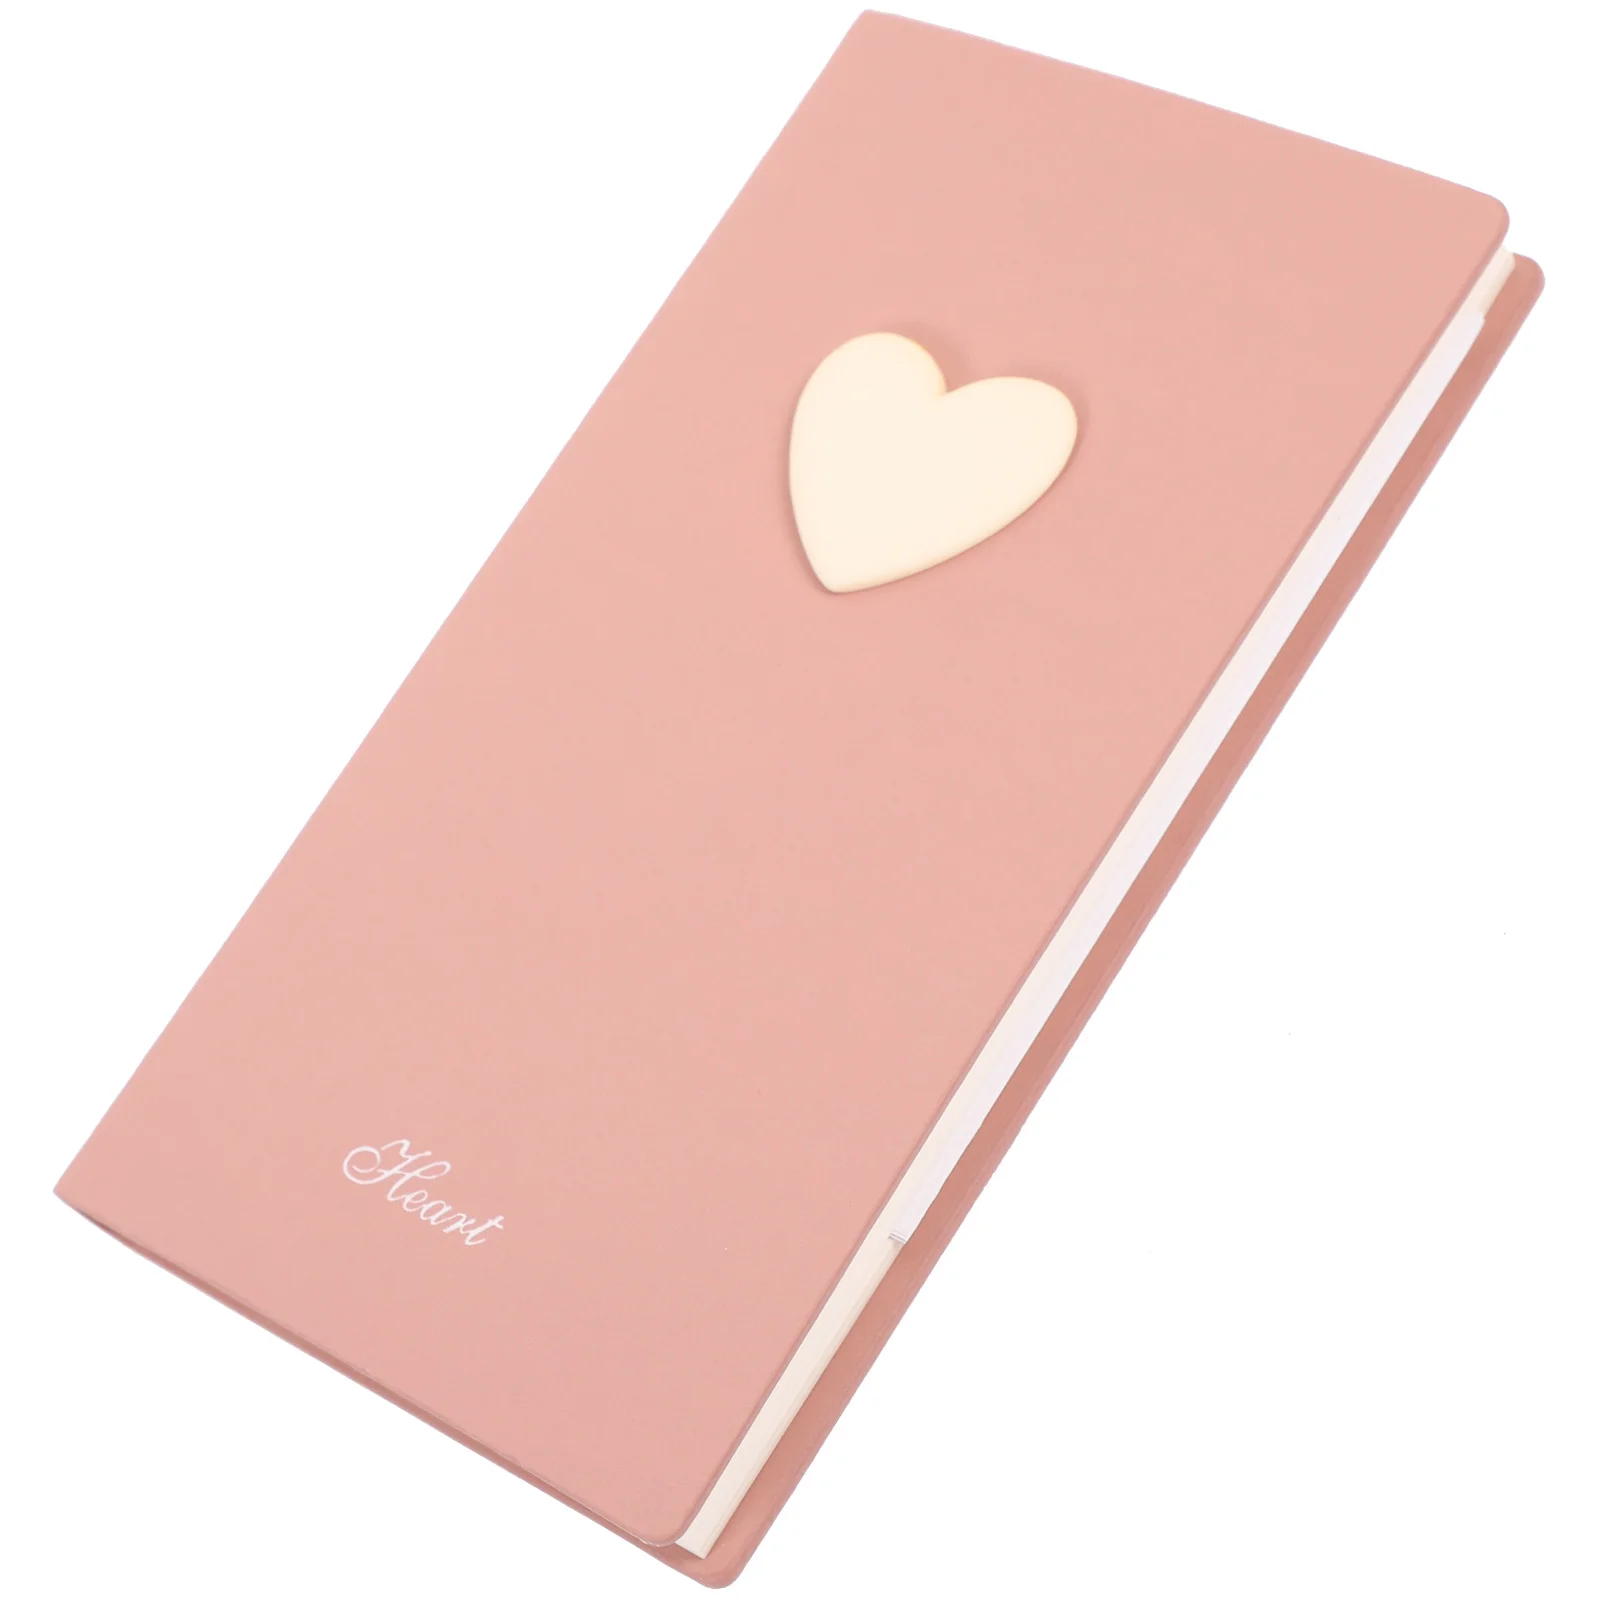 

Notebook Notebooks Planner Notepad Schedule Journal Daily Do List Planning Conference Office Portable Heart Writing Pu Plan